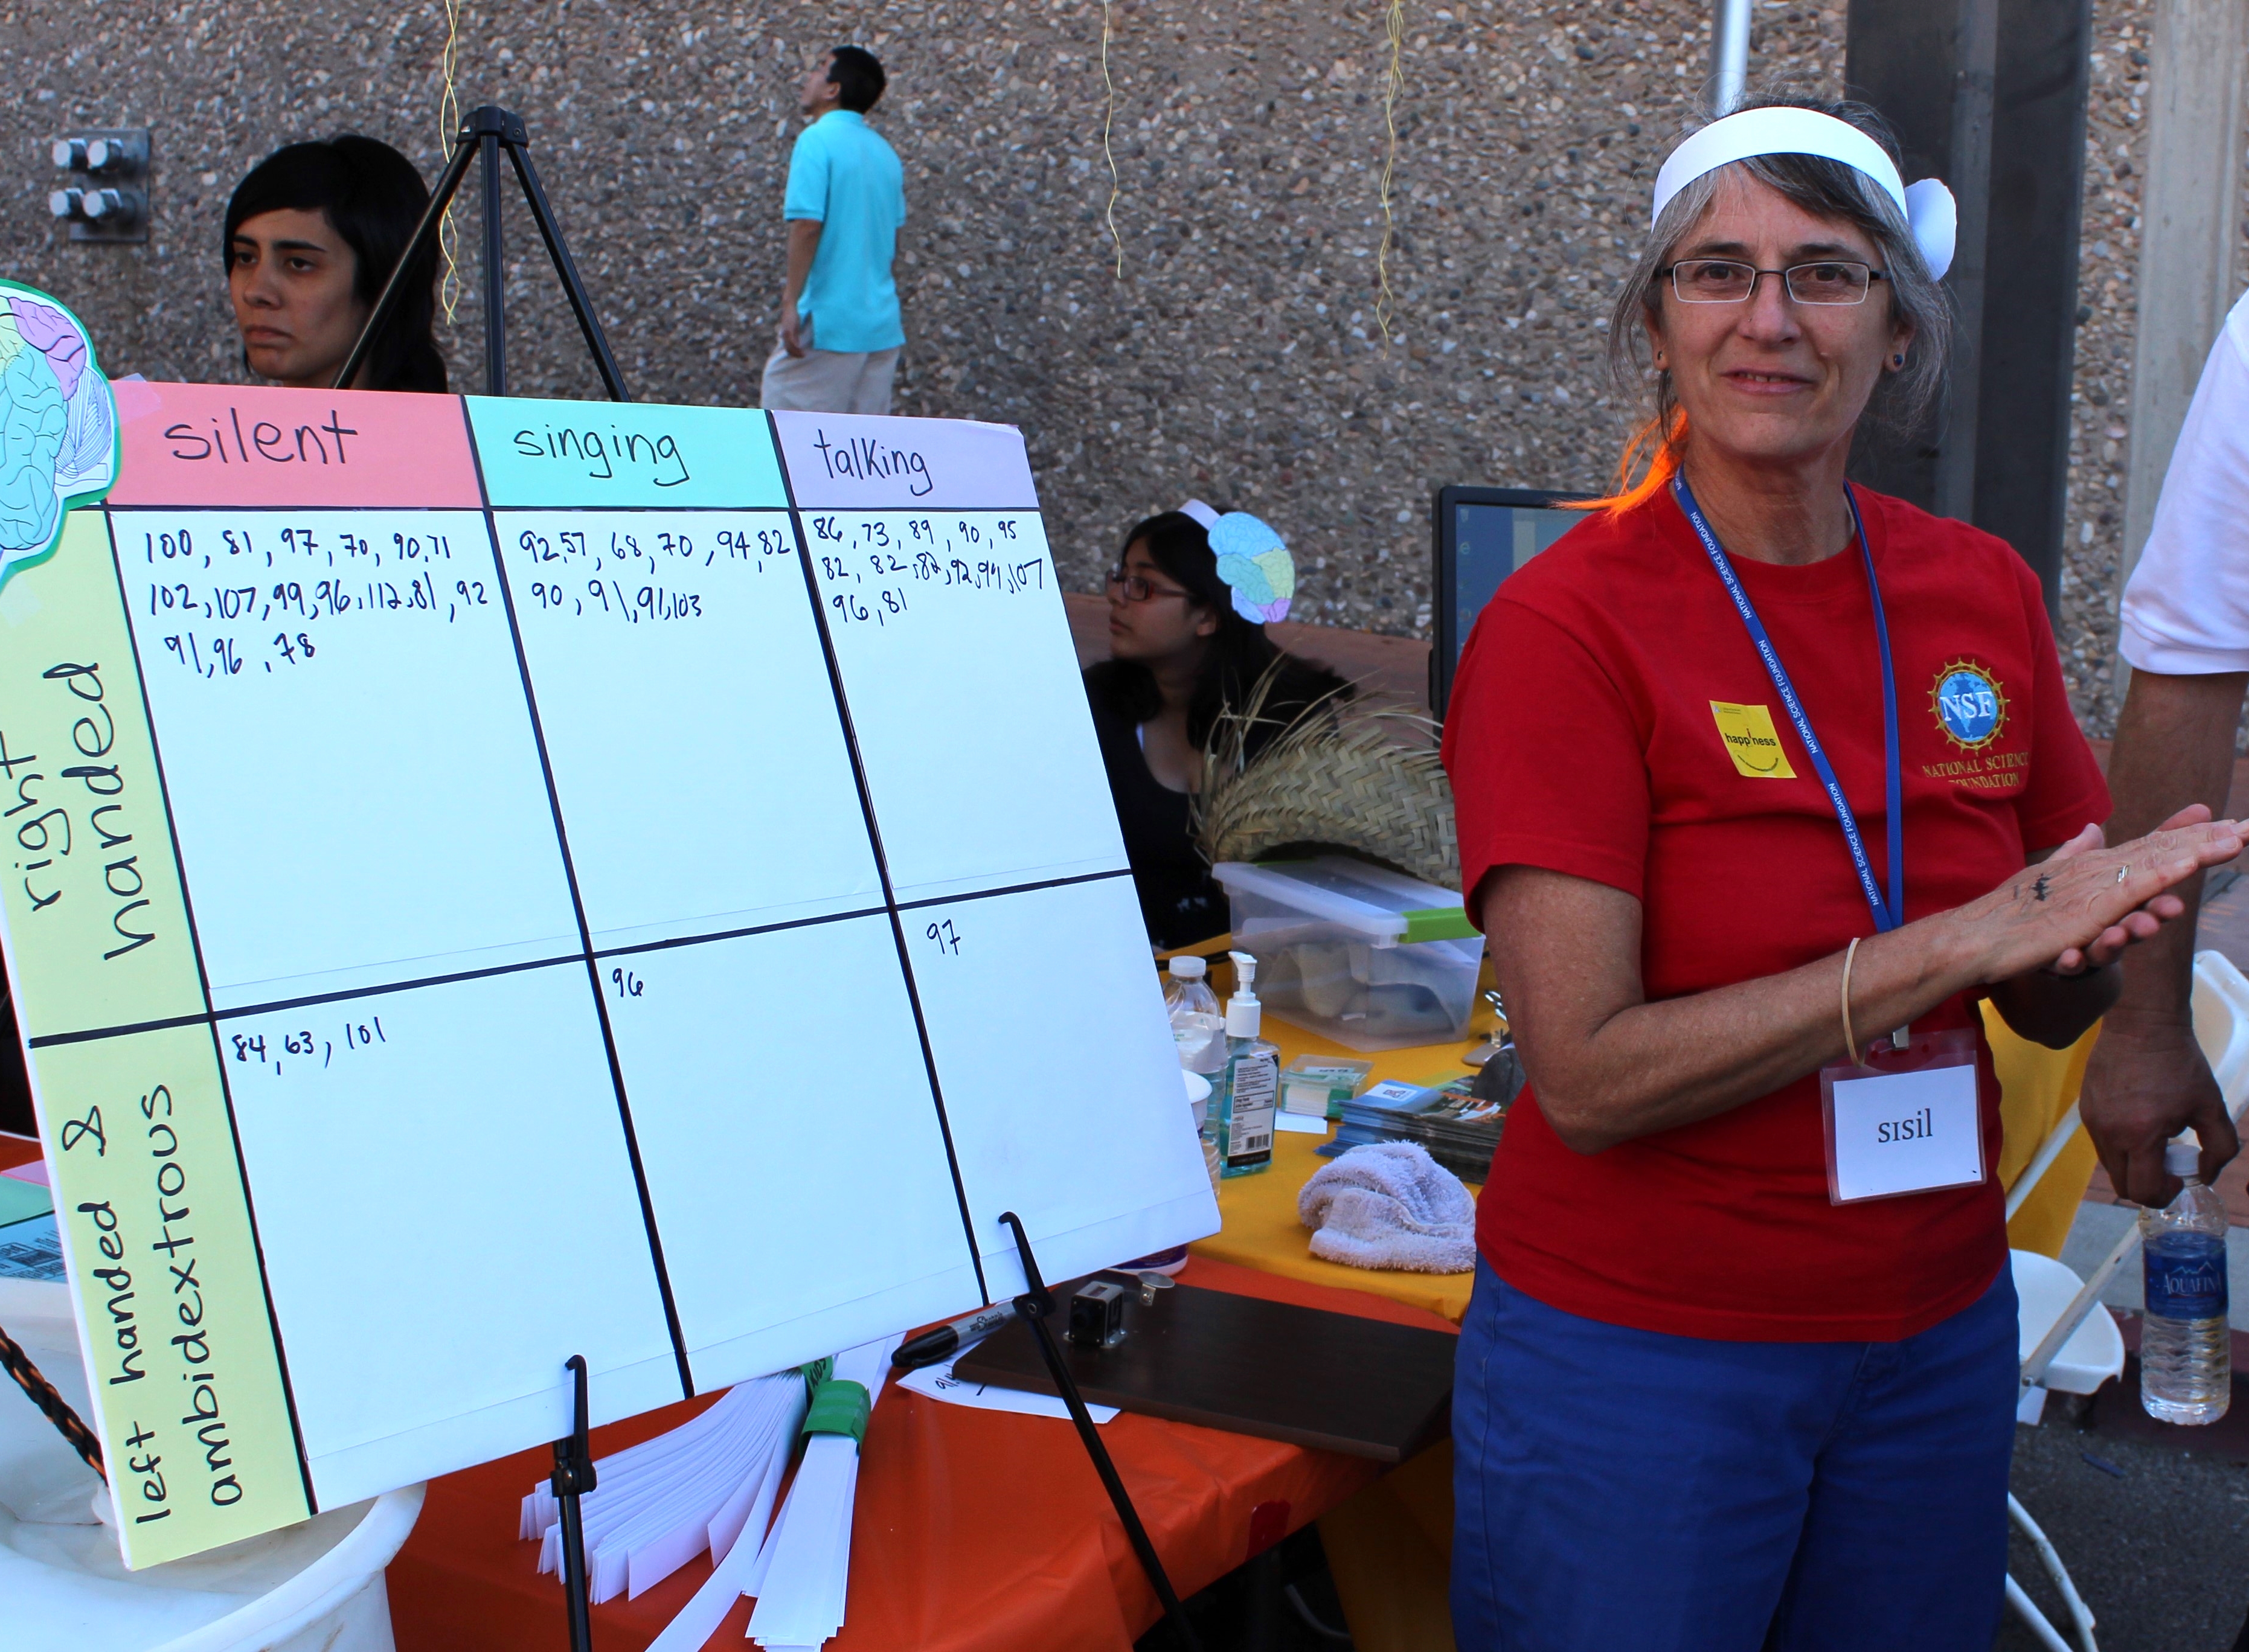 Cecile McKee at the Tucson Festival of Books